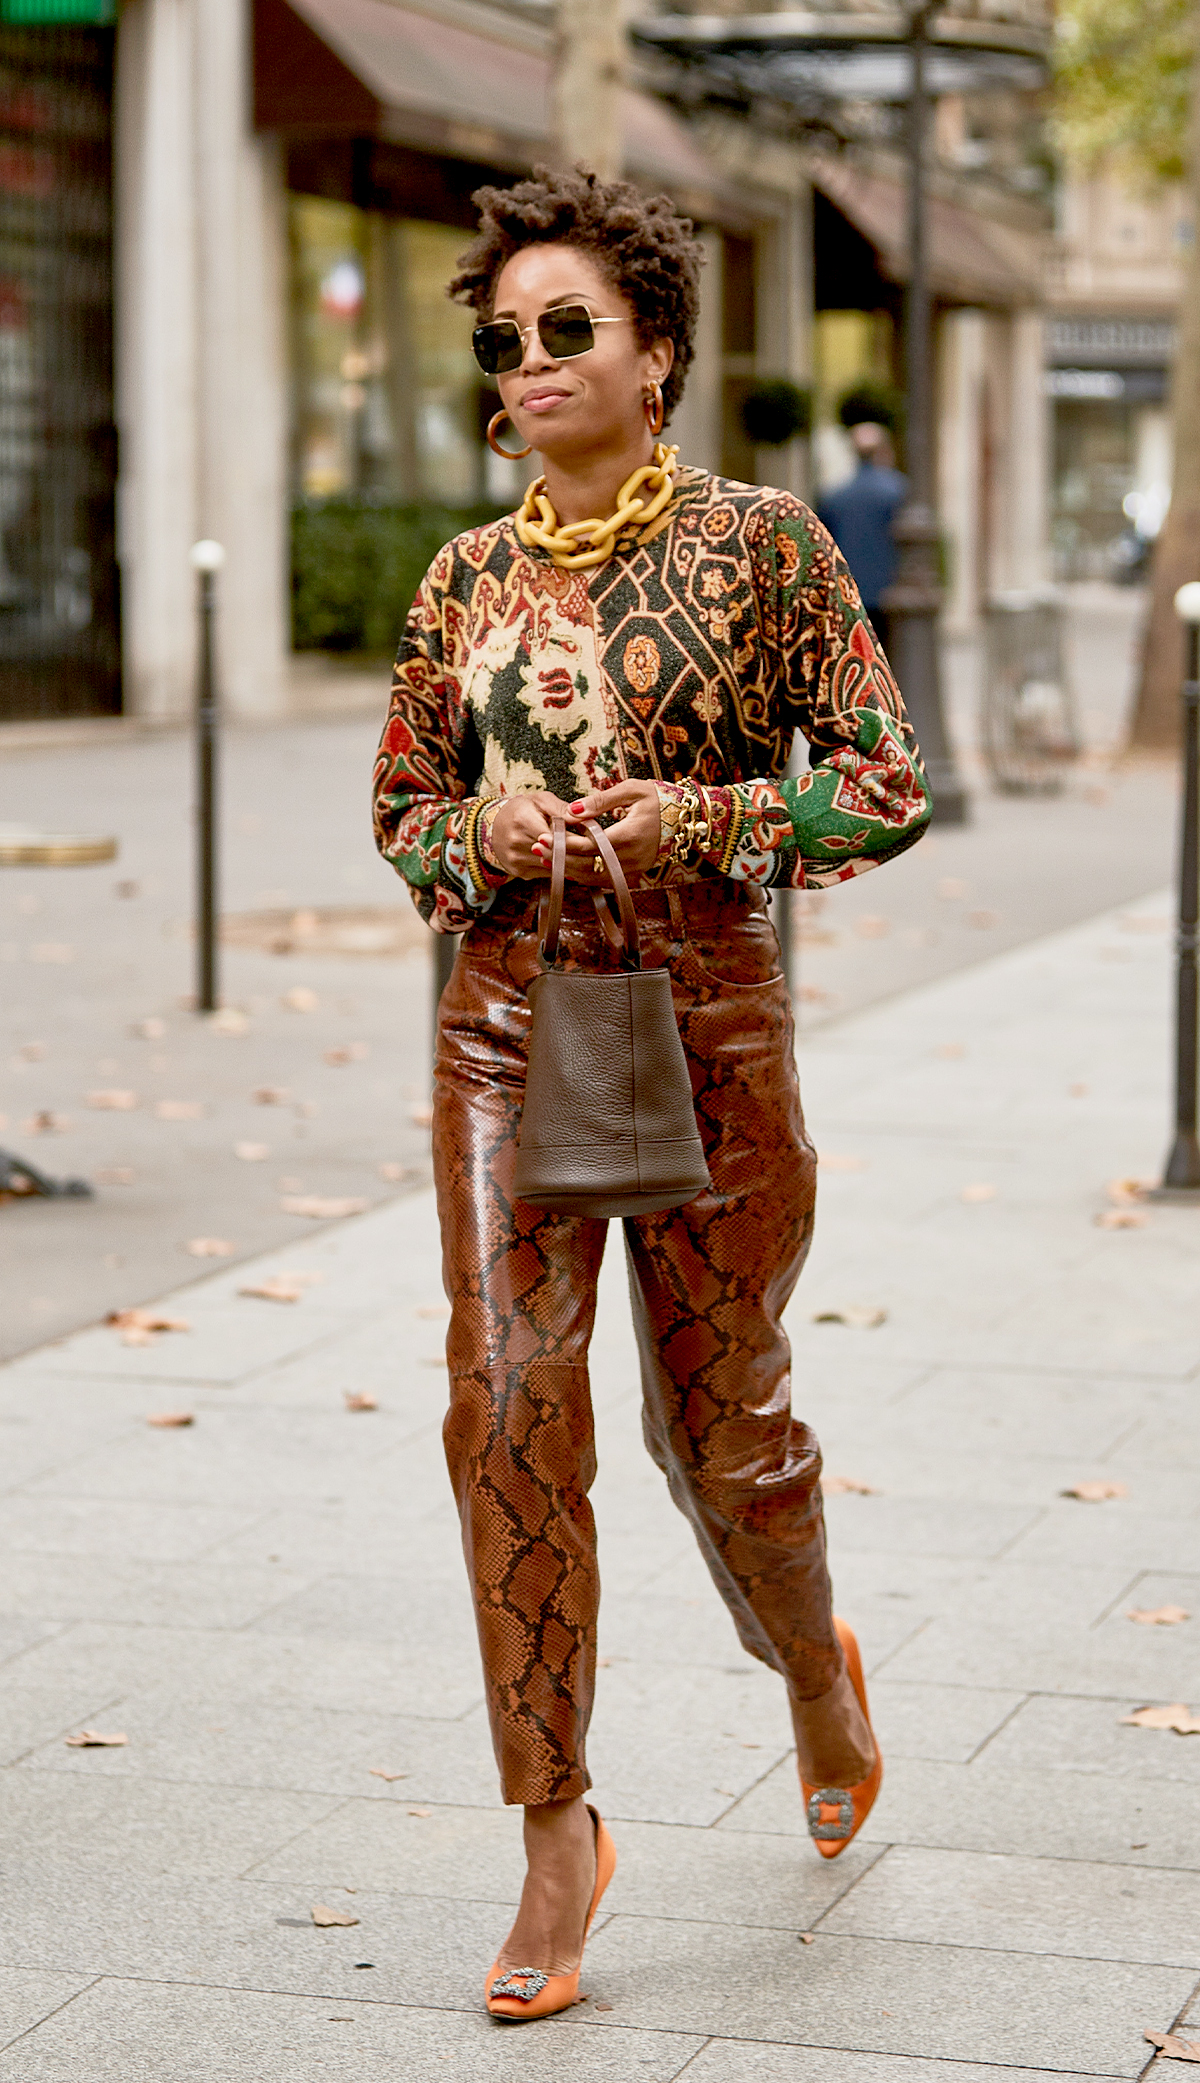 6 Of The Best Fashion Trends For Women Over 60 Who What Wear